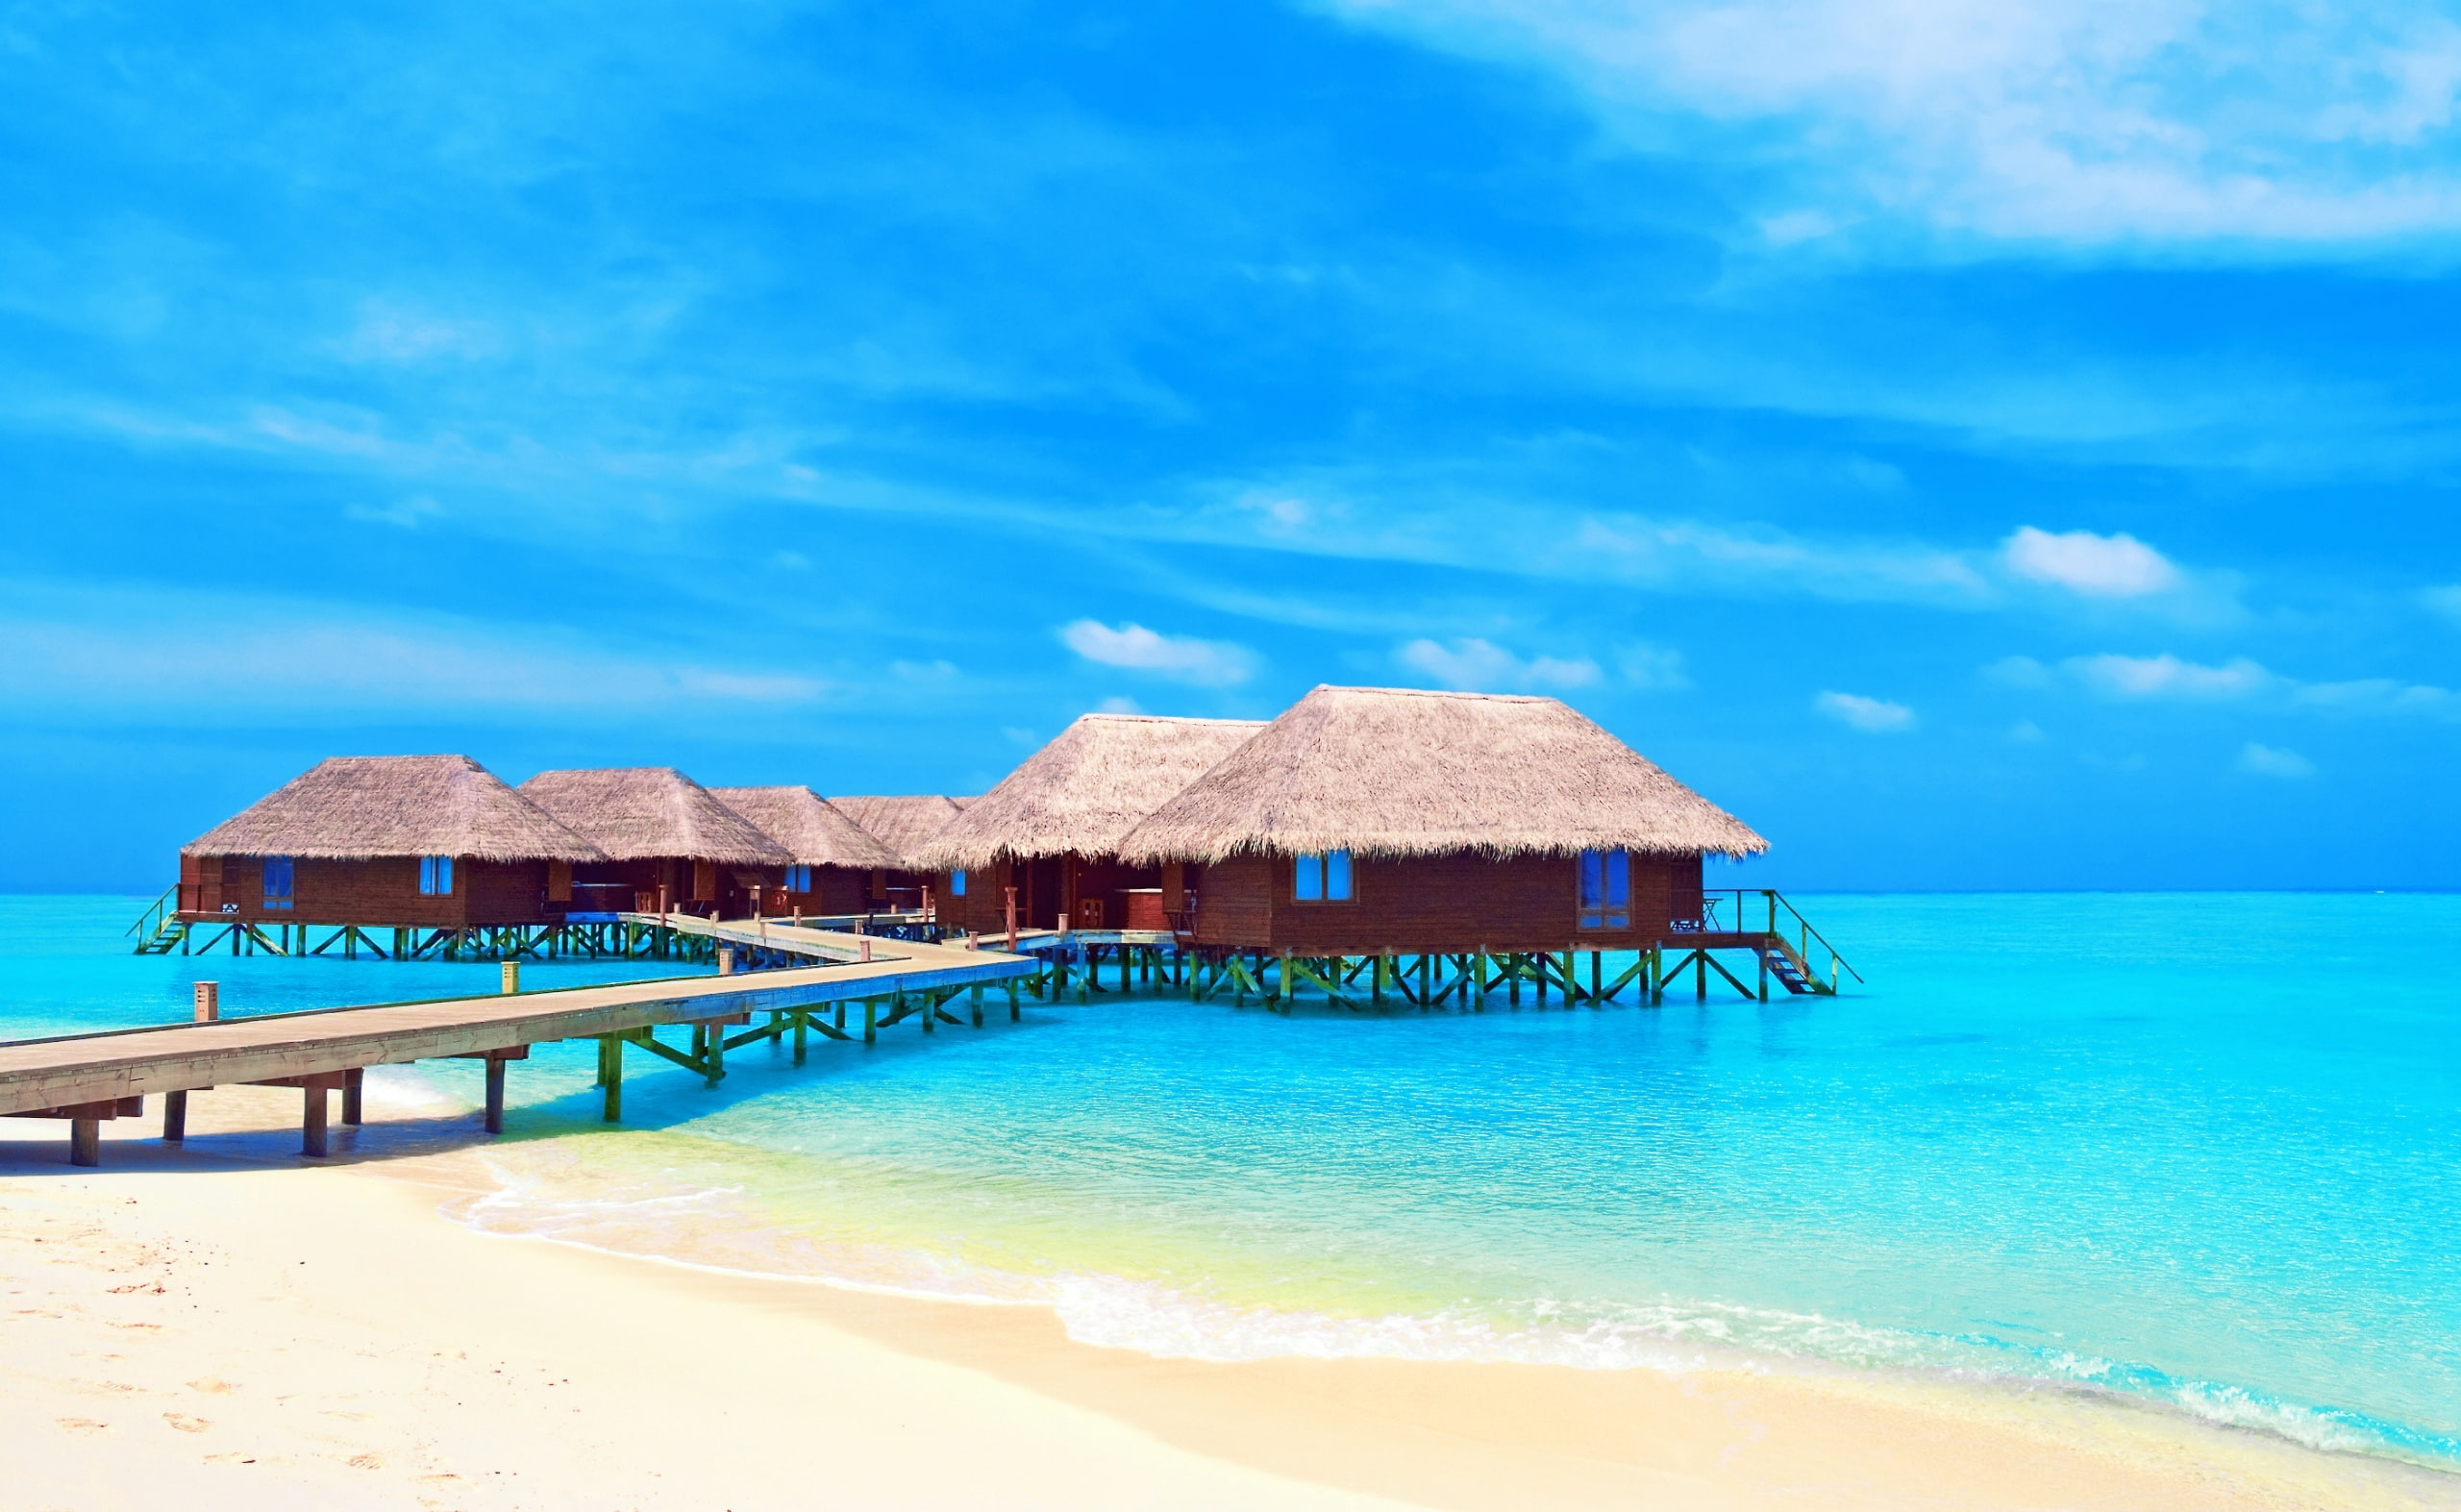 Tropical Water Bungalows, brown wooden dock, Travel, Islands